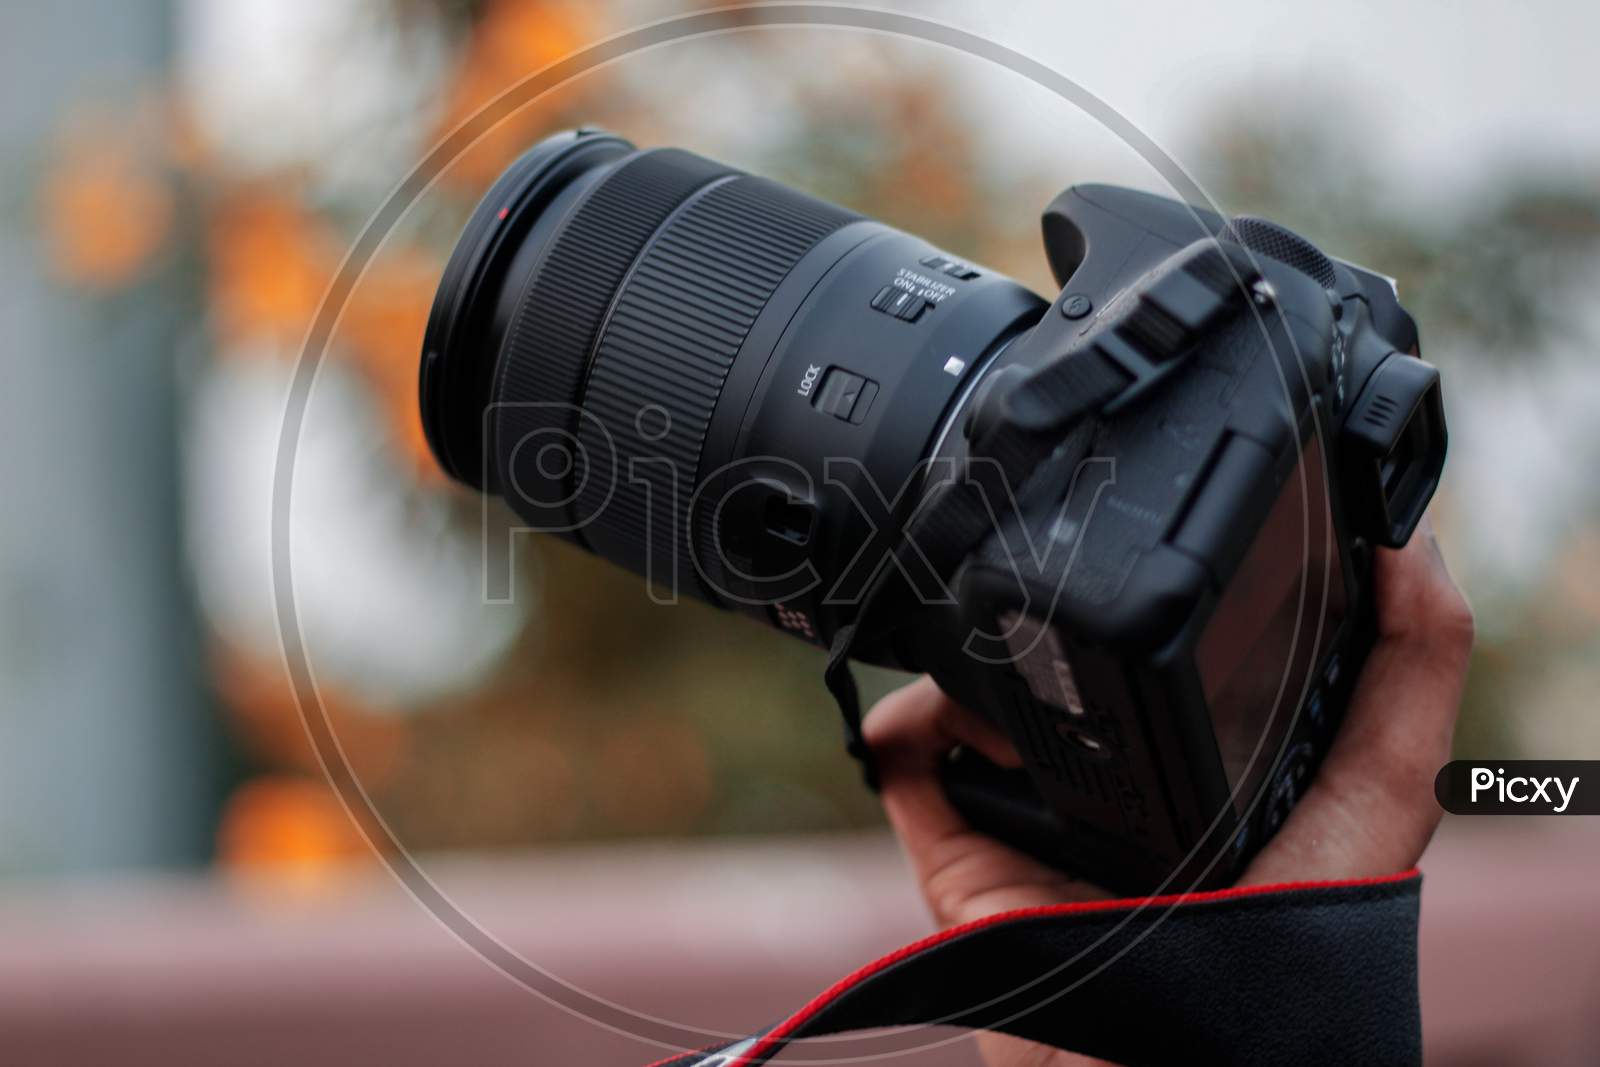 dslr camera with fully blurry background